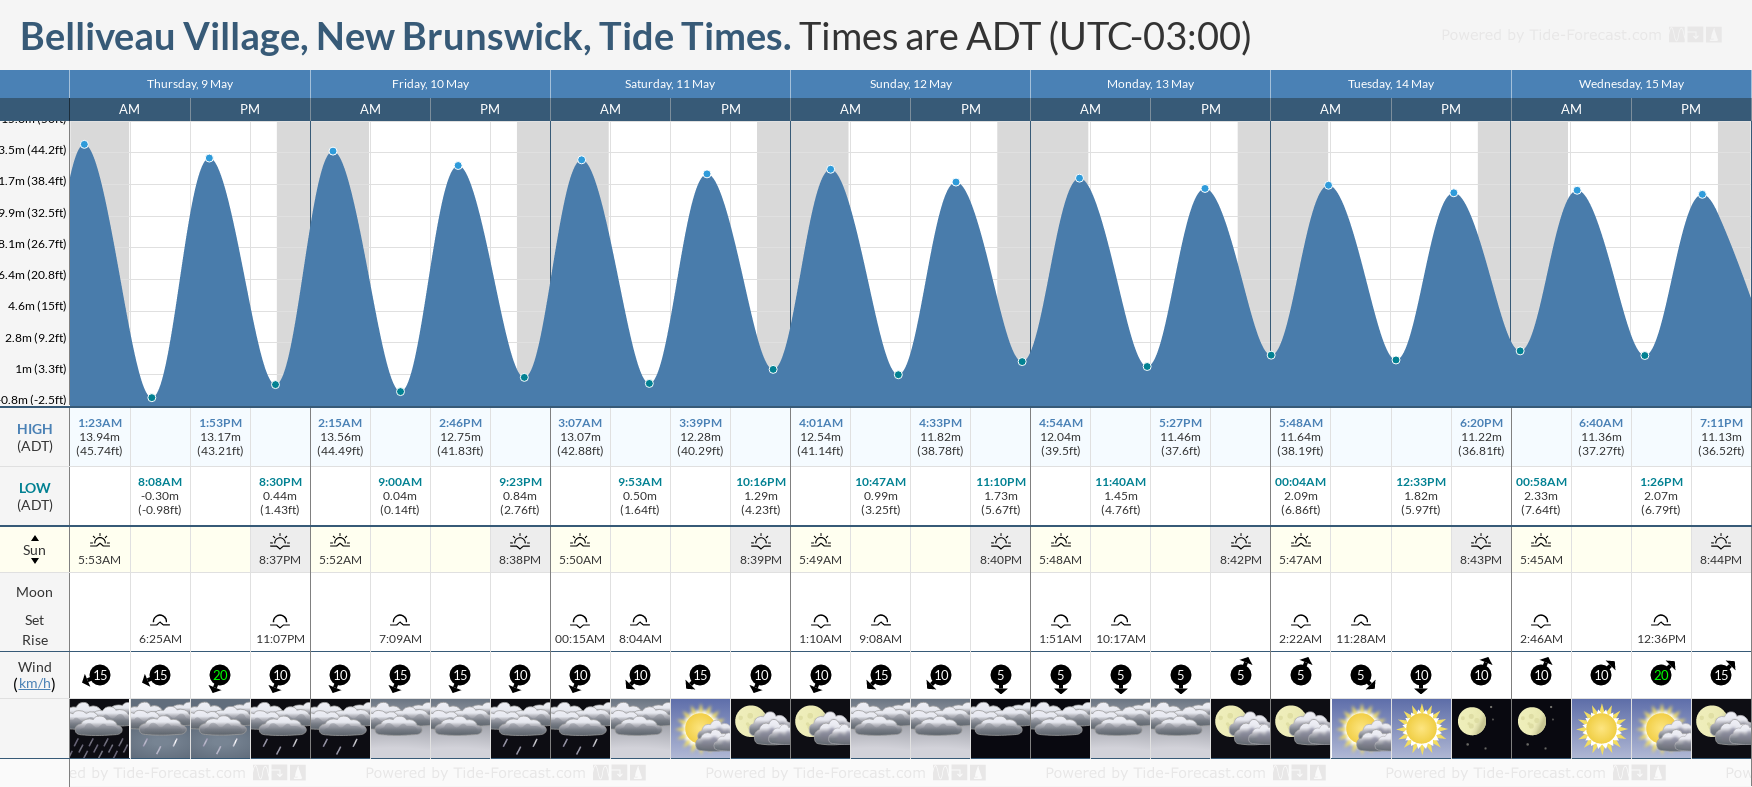 Belliveau Village, New Brunswick Tide Chart including high and low tide tide times for the next 7 days